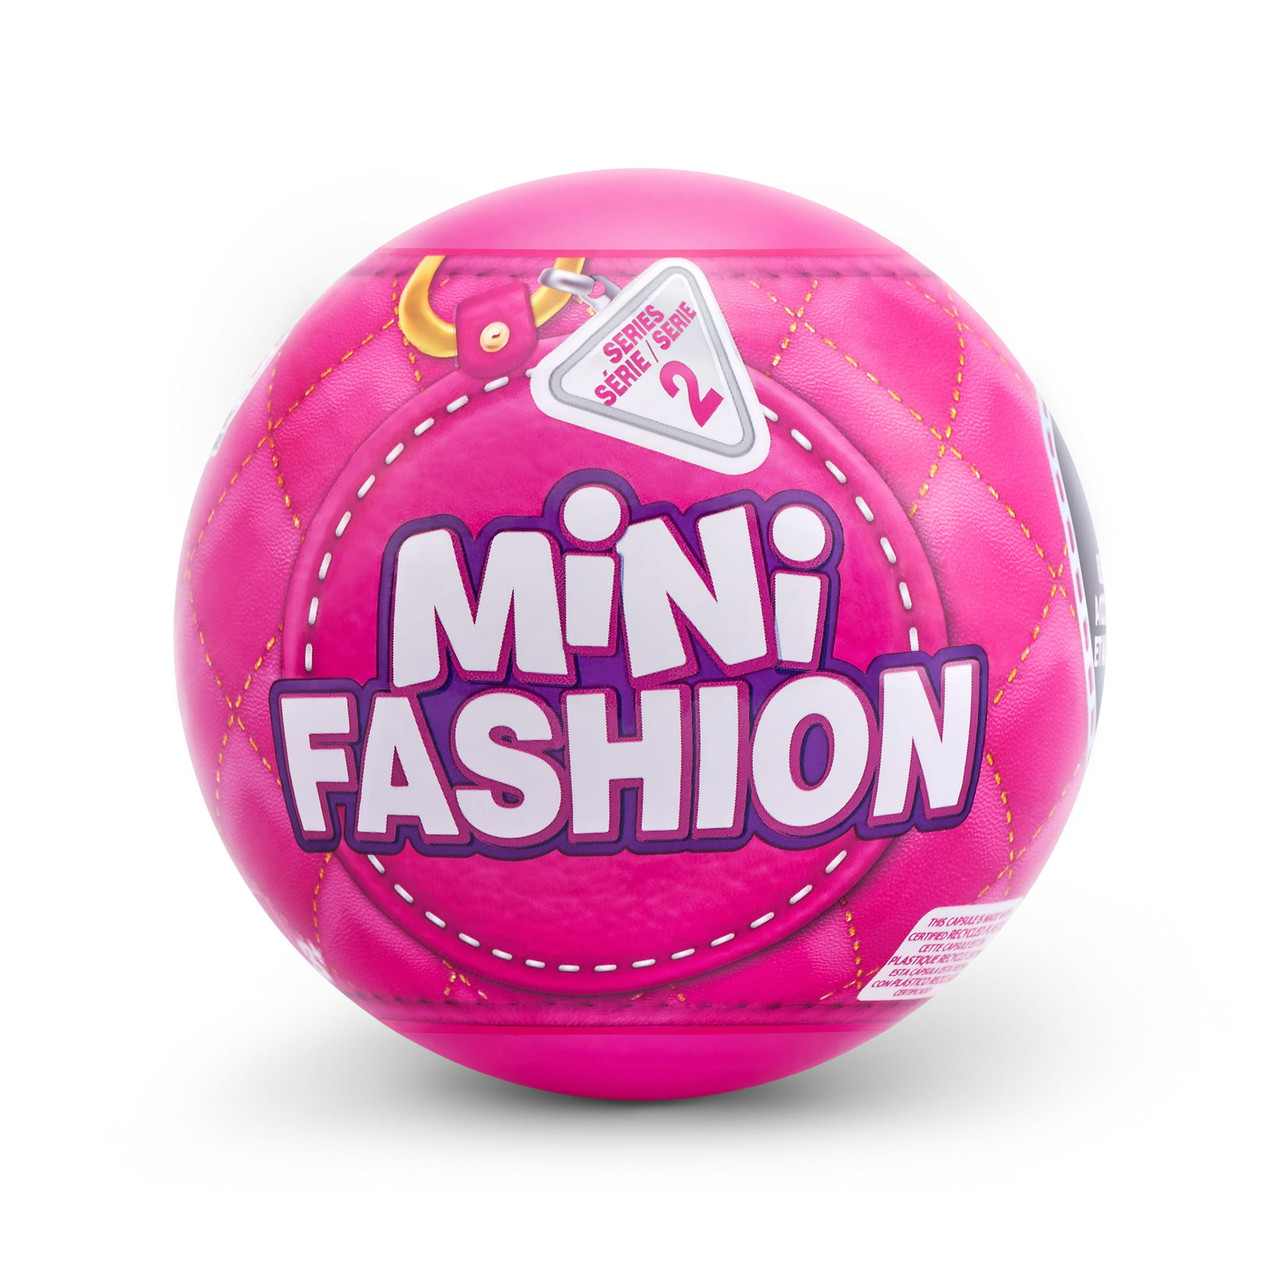 5 Surprise Mini Fashion Series 2 Capsule Novelty and Gag Toy by